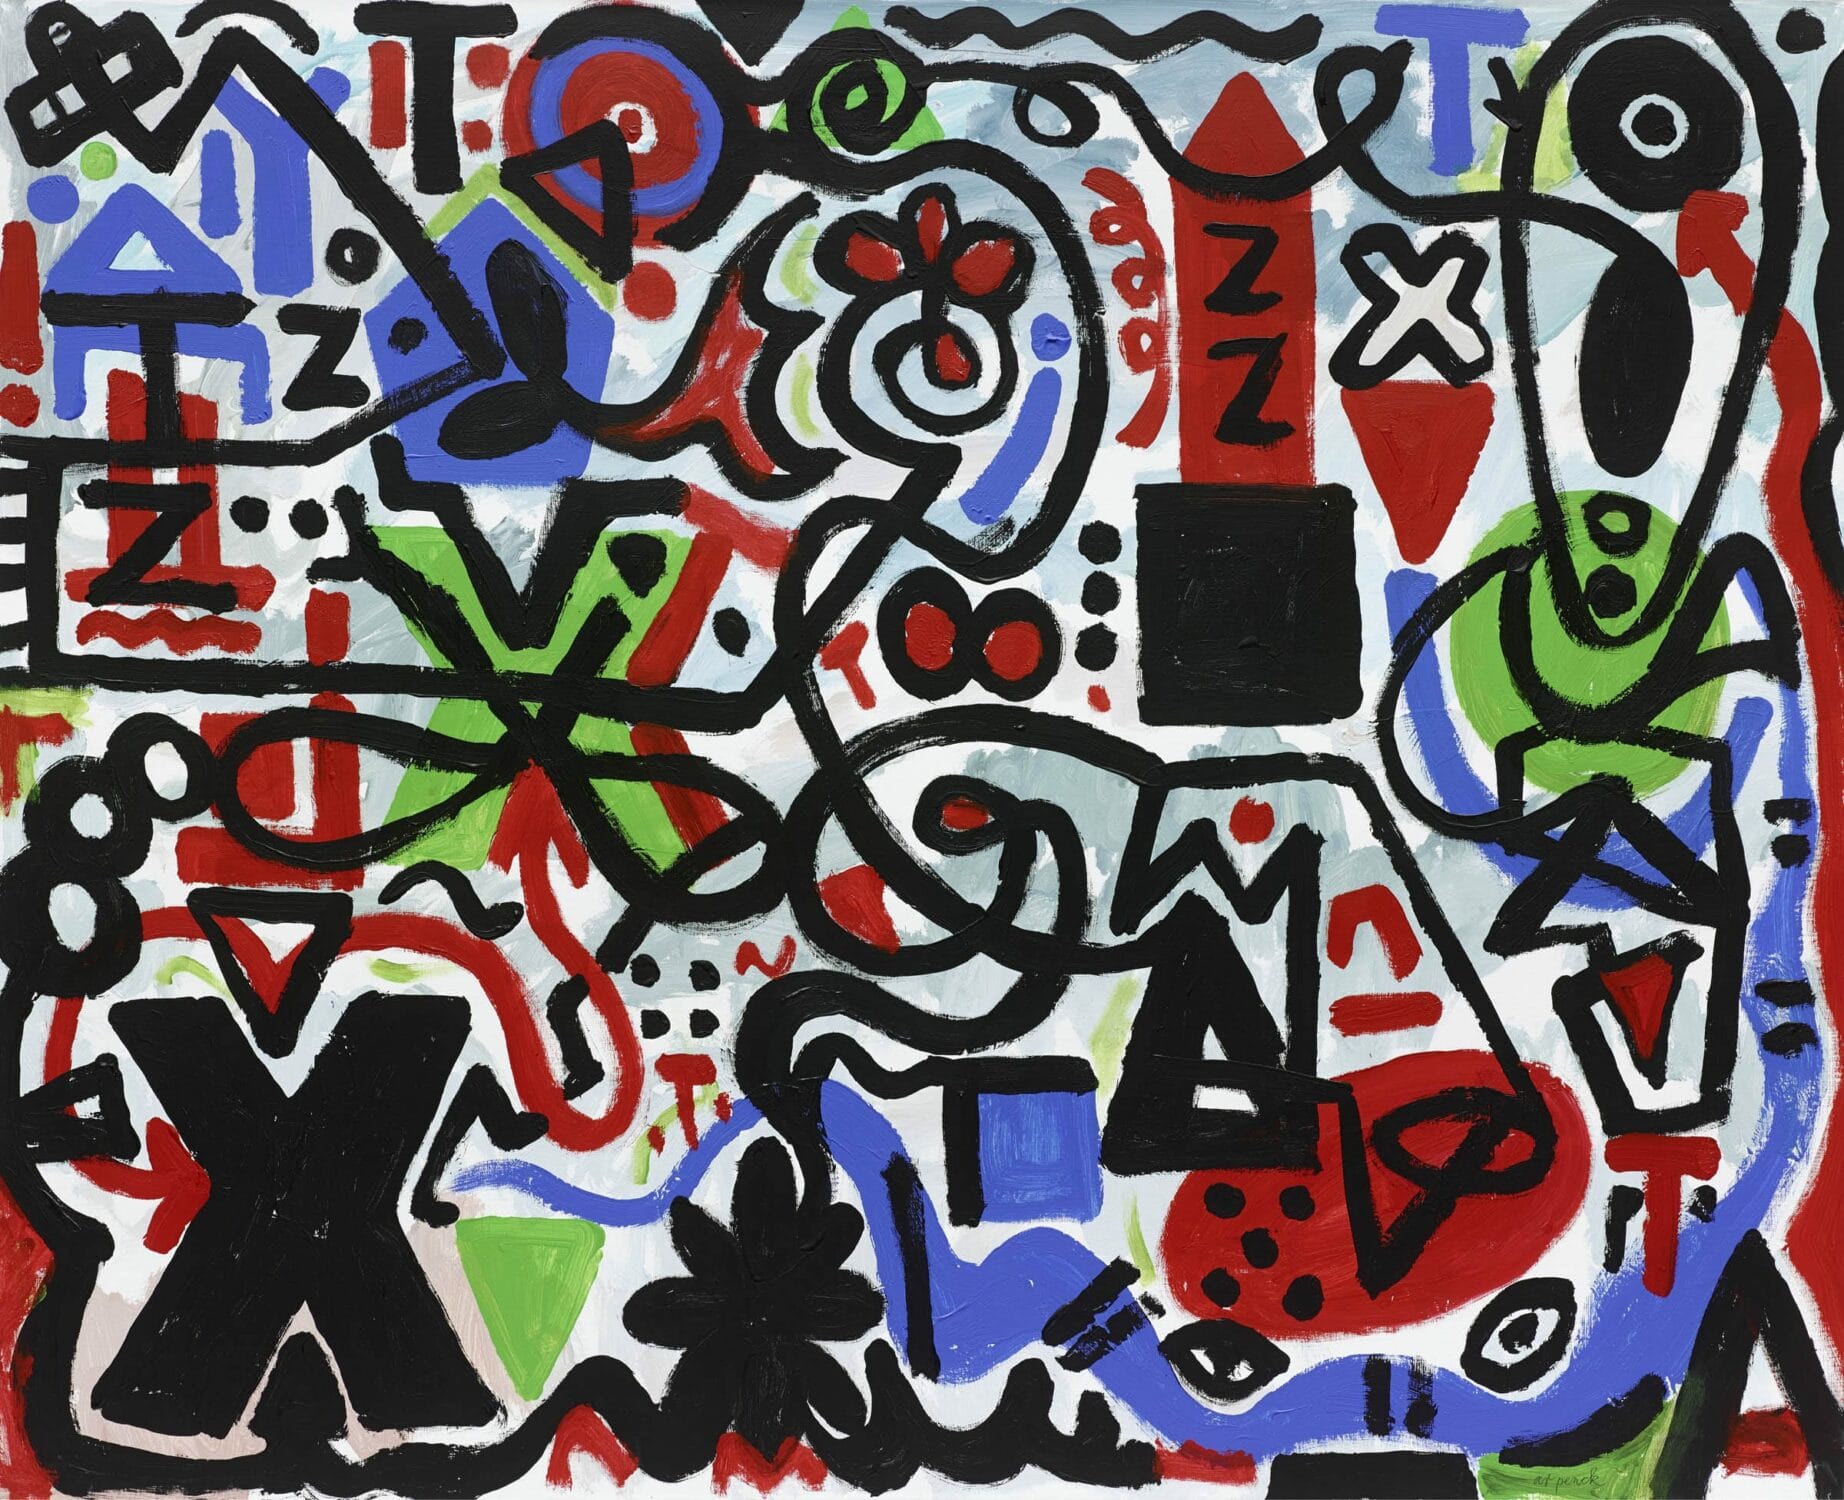 A.R. Penck, "Ungewissheit (Uncertainty)", 2011. Acrylic on canvas, 51 1/4 x 63 inches (130 x 160 cm)